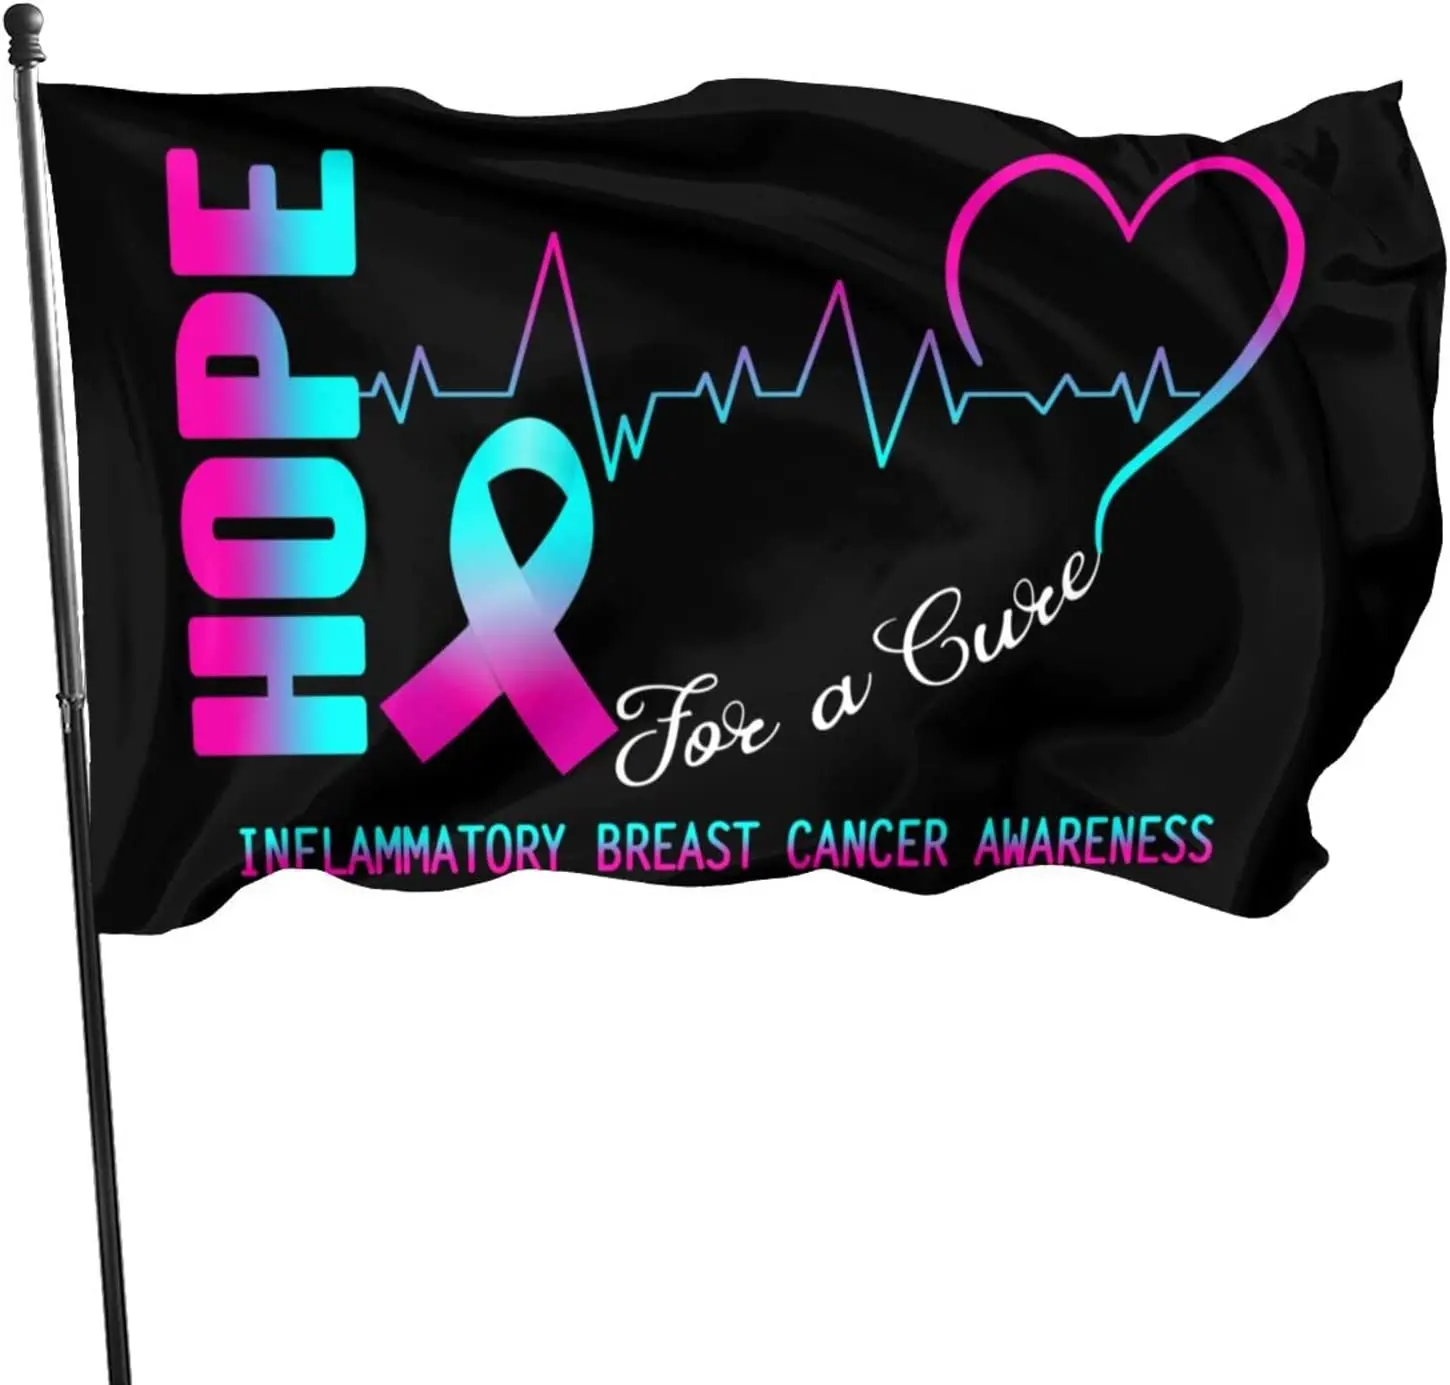 

Hope for a Cure inflammatory Breast Cancer Awareness Flag 3x5 FT Banner Outdoor Indoor Decor- Polyester 3by5 Flags